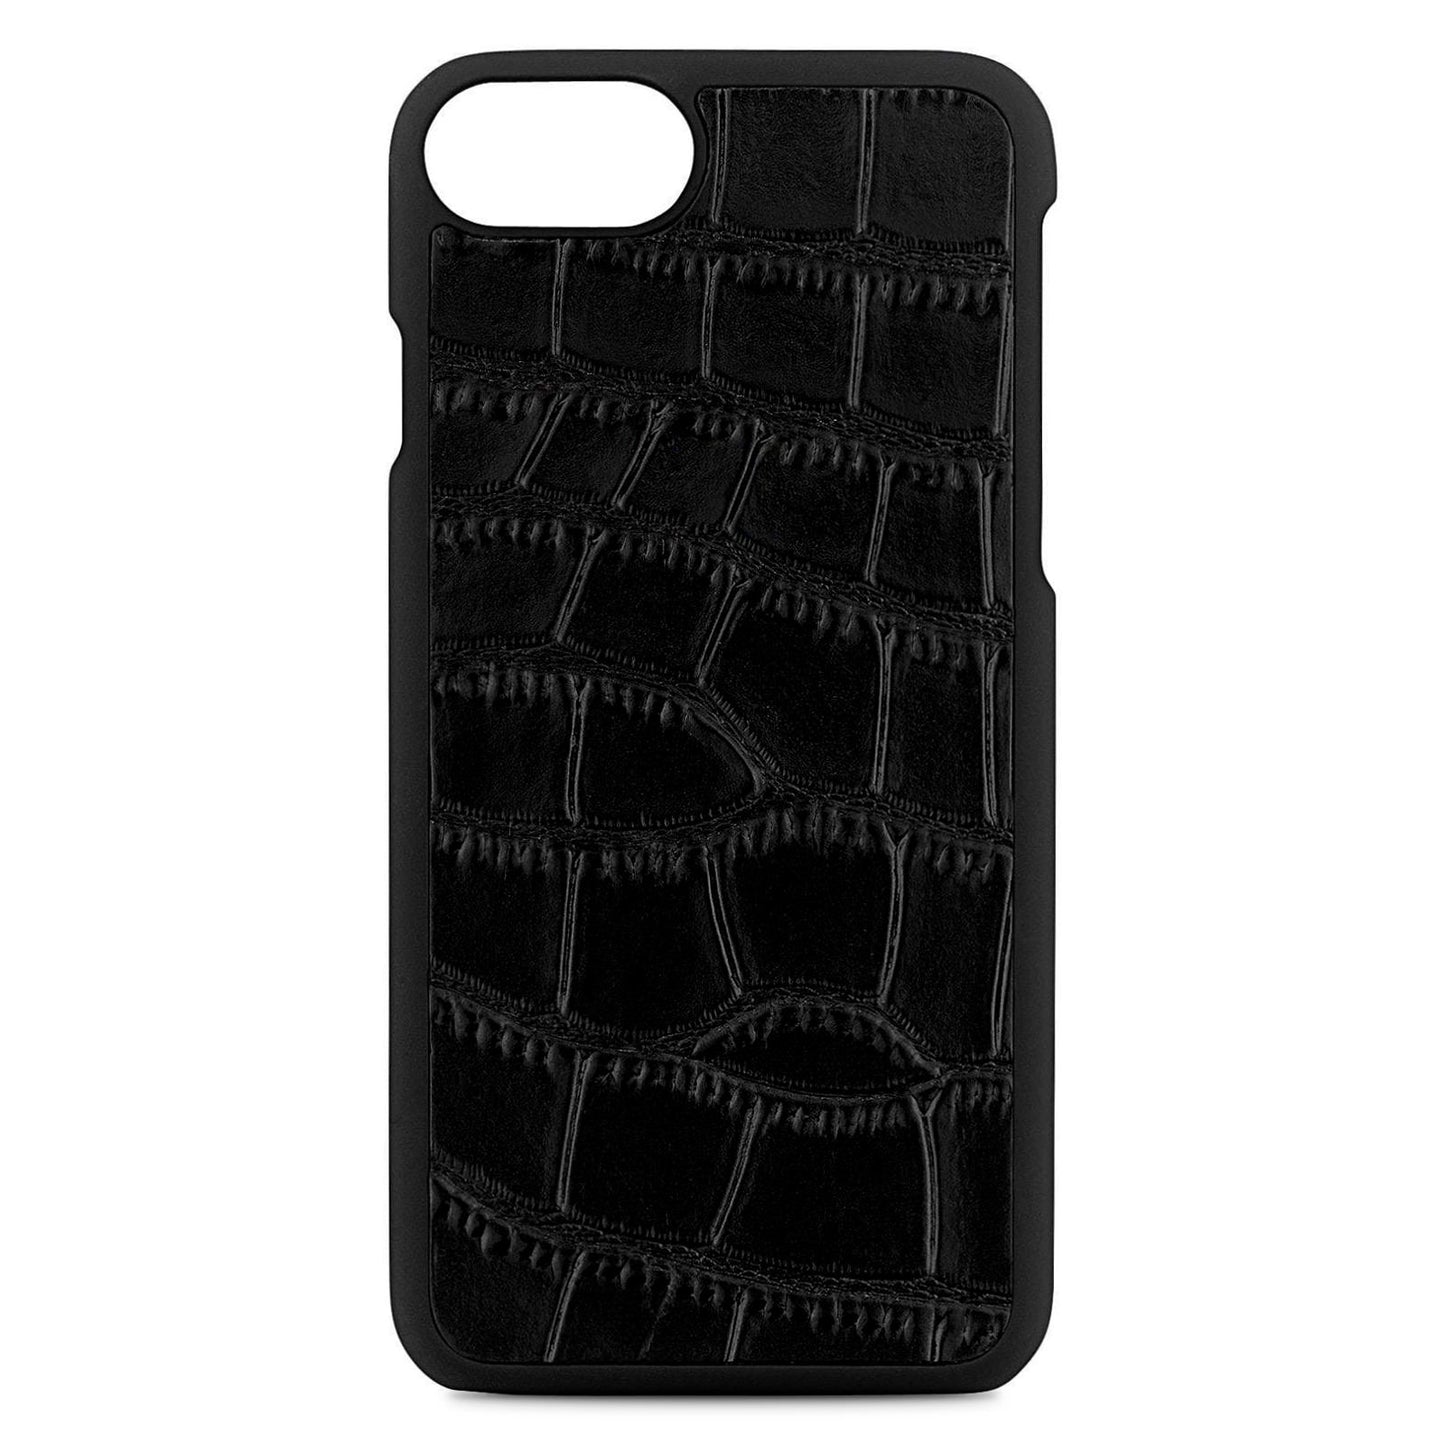 Blank Personalised Black Croc Leather iPhone Case